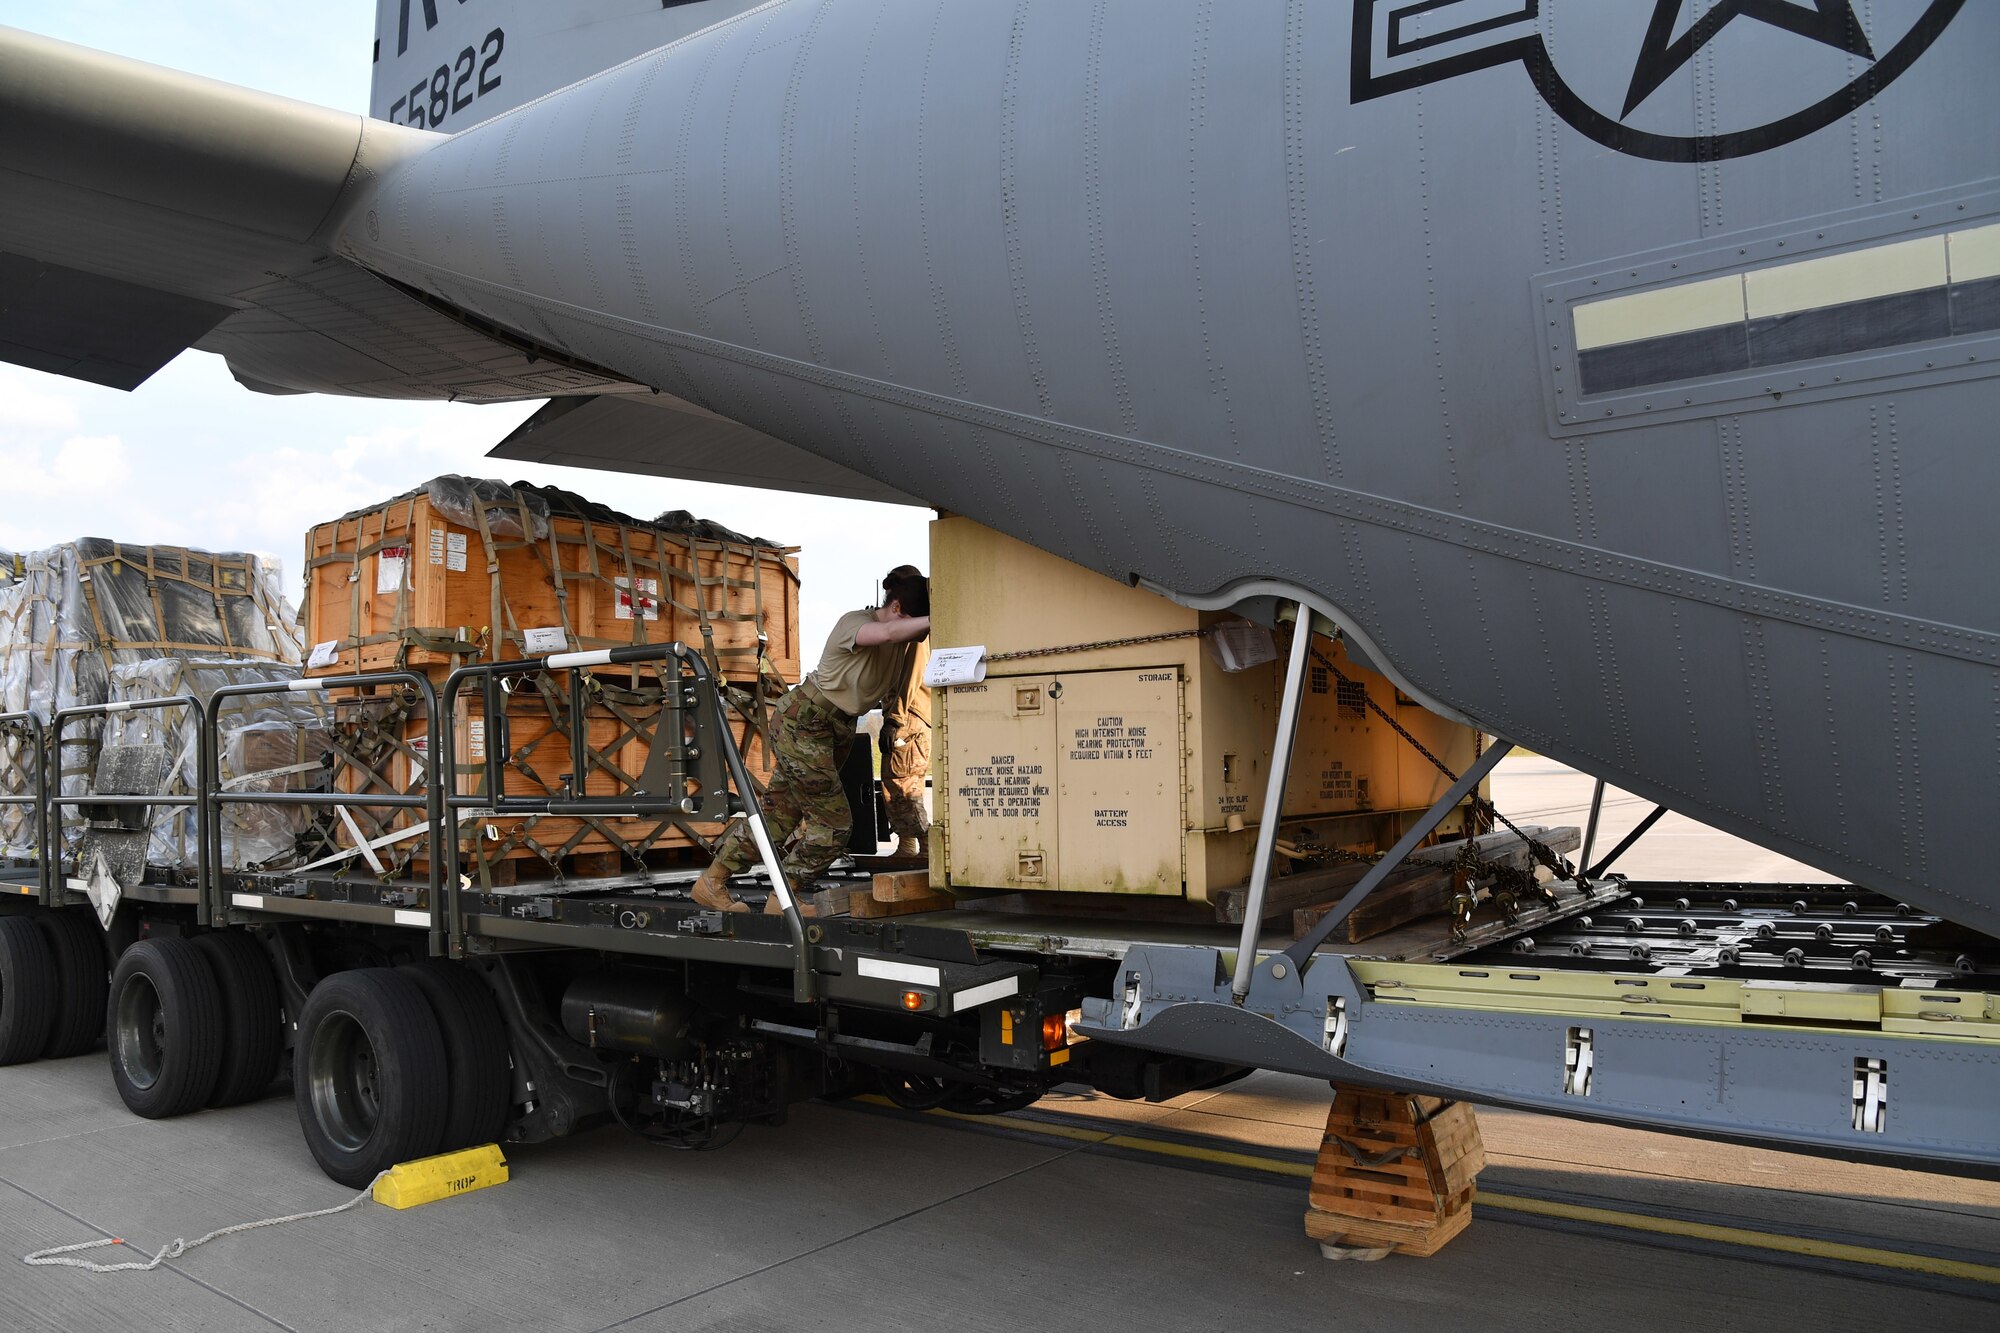 Cargo being loaded onto military aircraft.